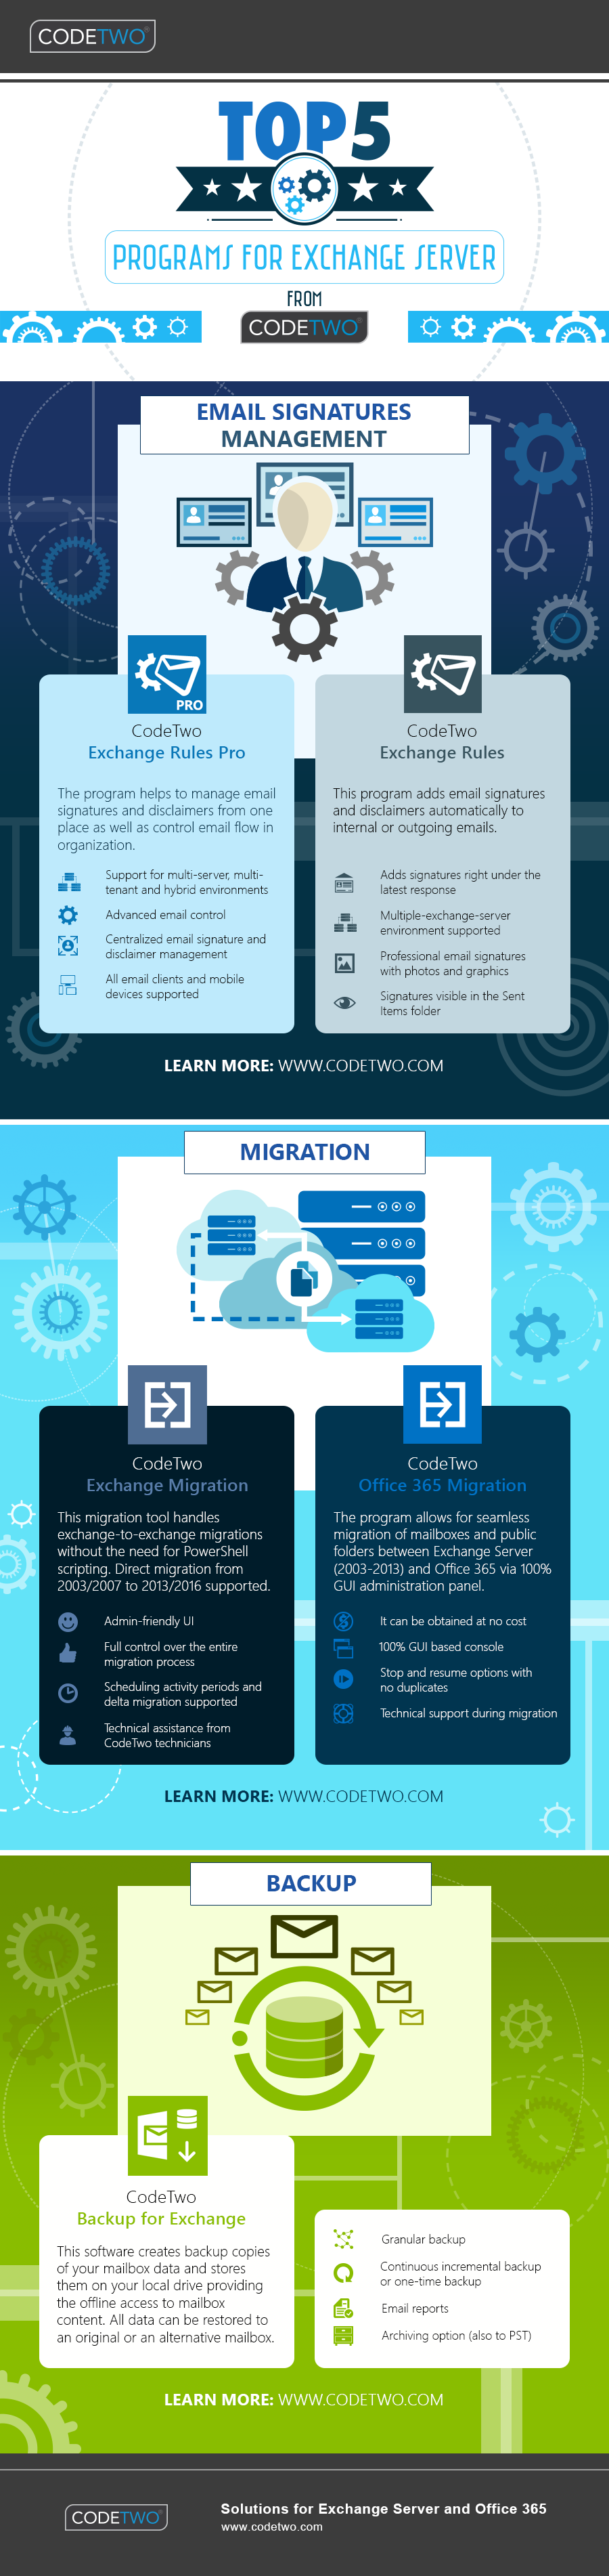 Learn more about CodeTwo Top 5 Programs For Exchange Server - Infographic